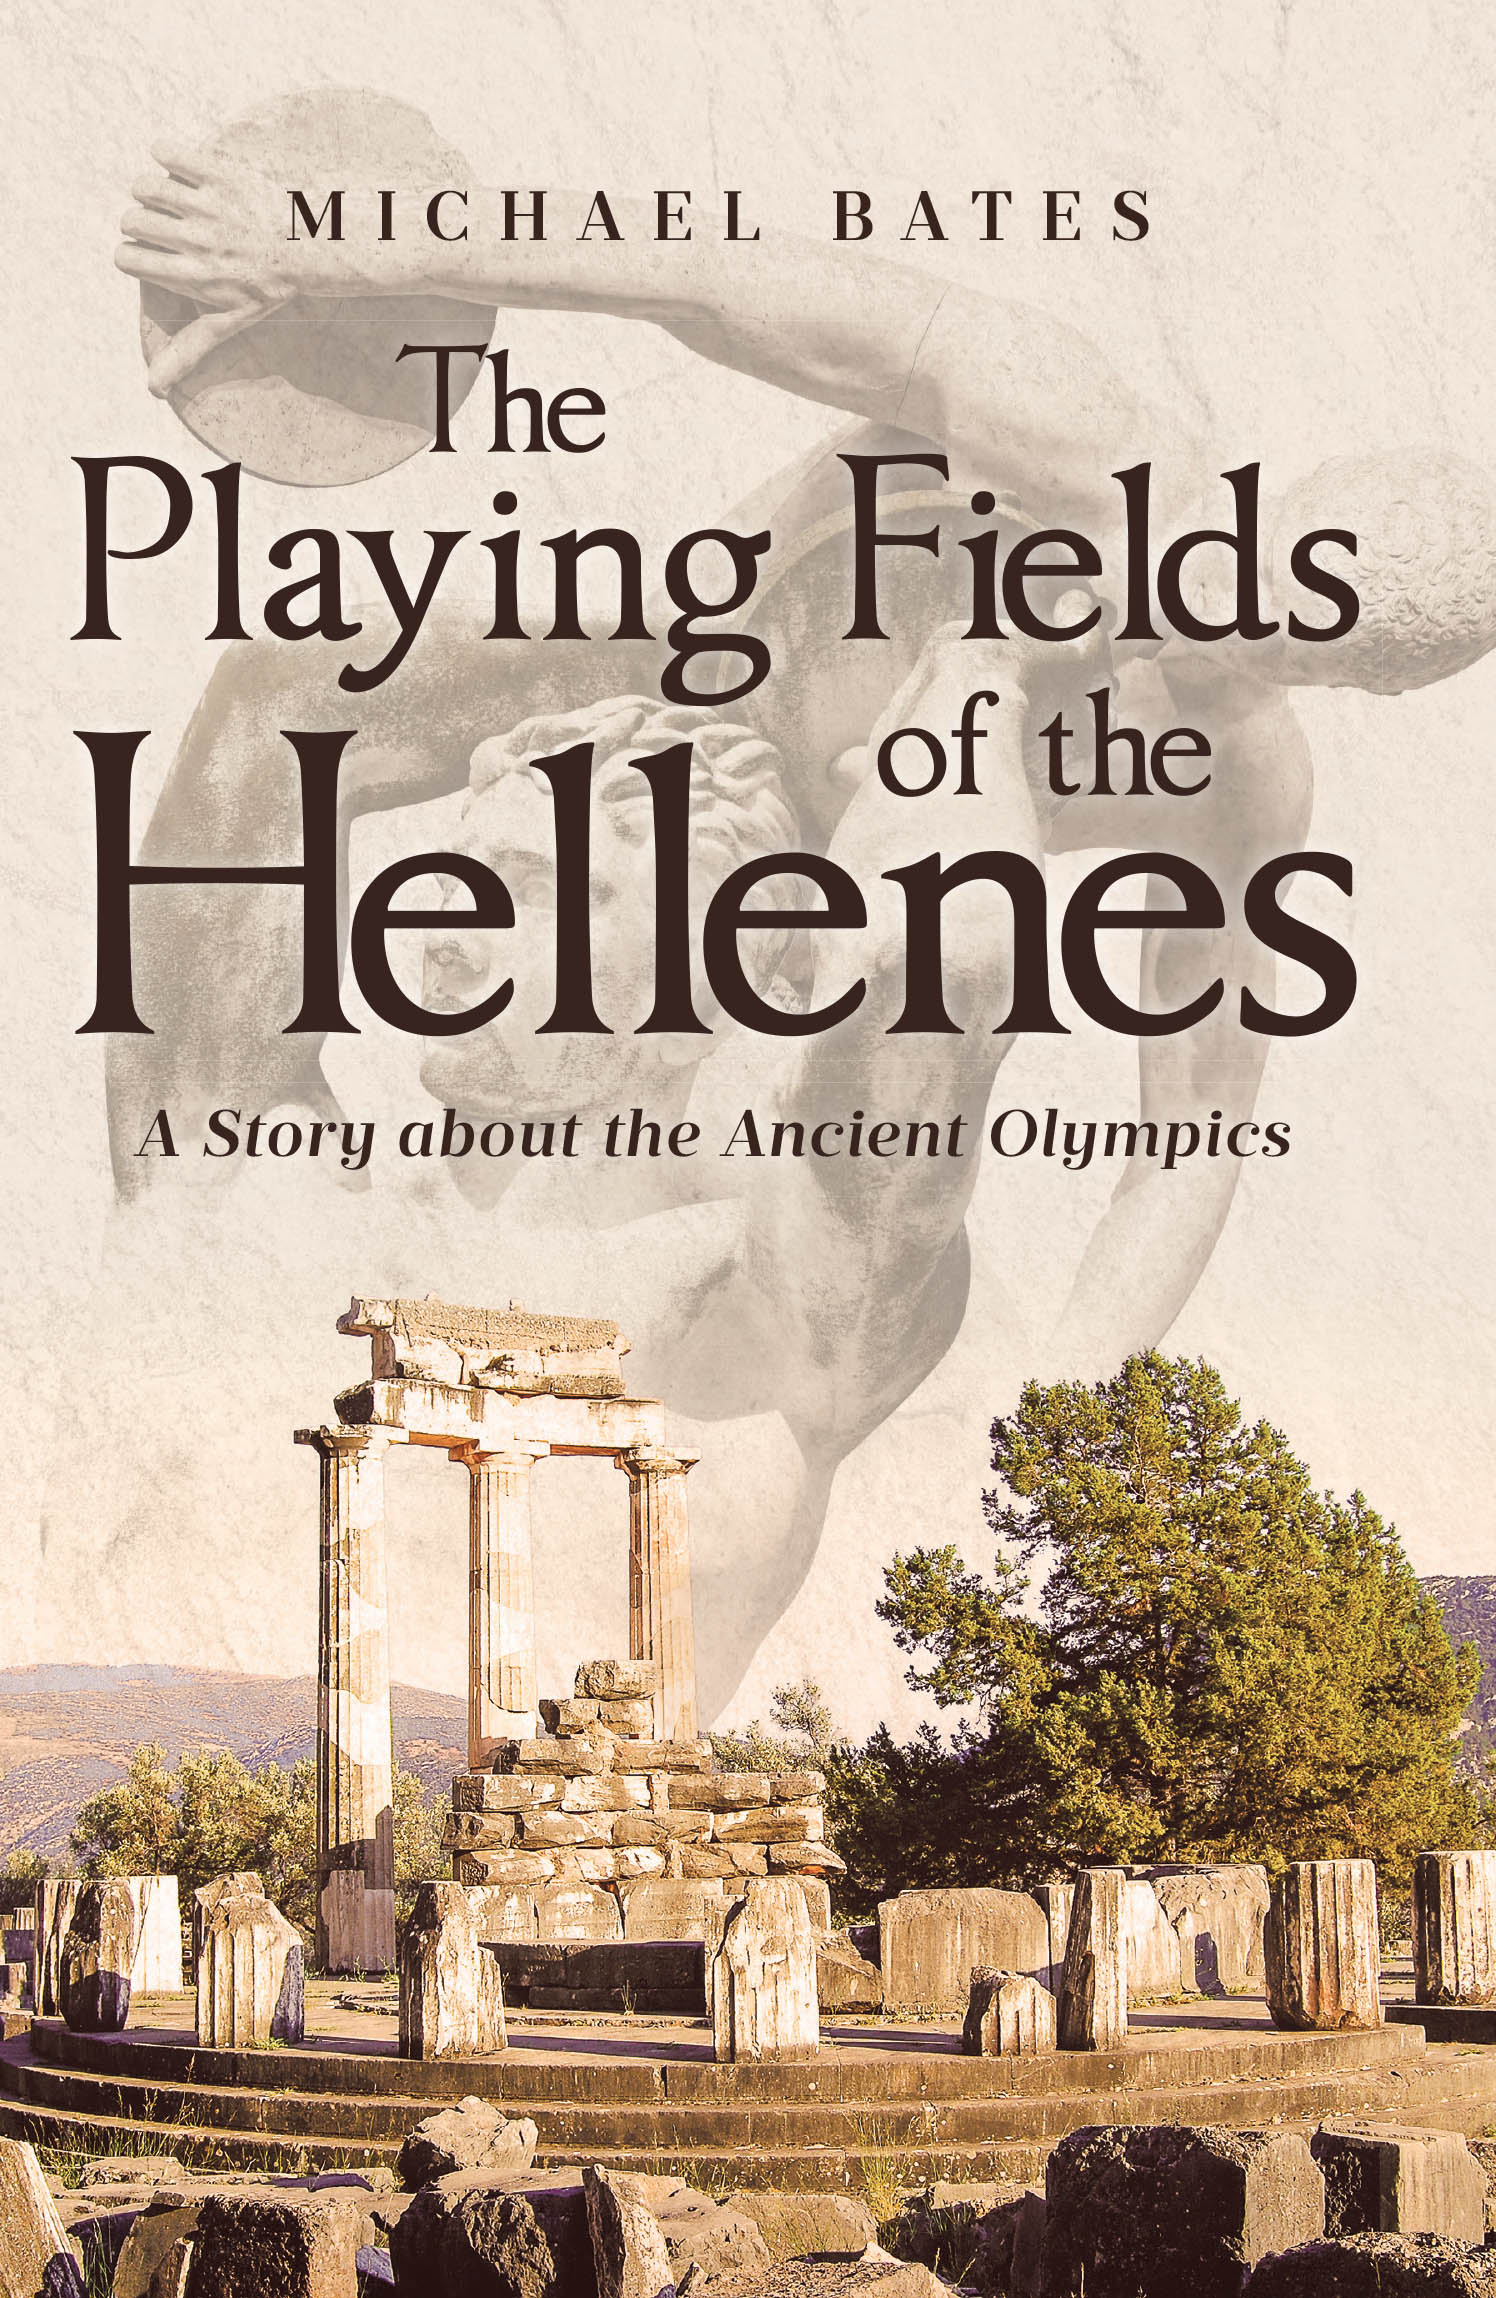 Author Michael Bates’s New Book, “The Playing Fields of the Hellenes: A Story about the Ancient Olympics,” Explores the True Origins of Organized Athletics